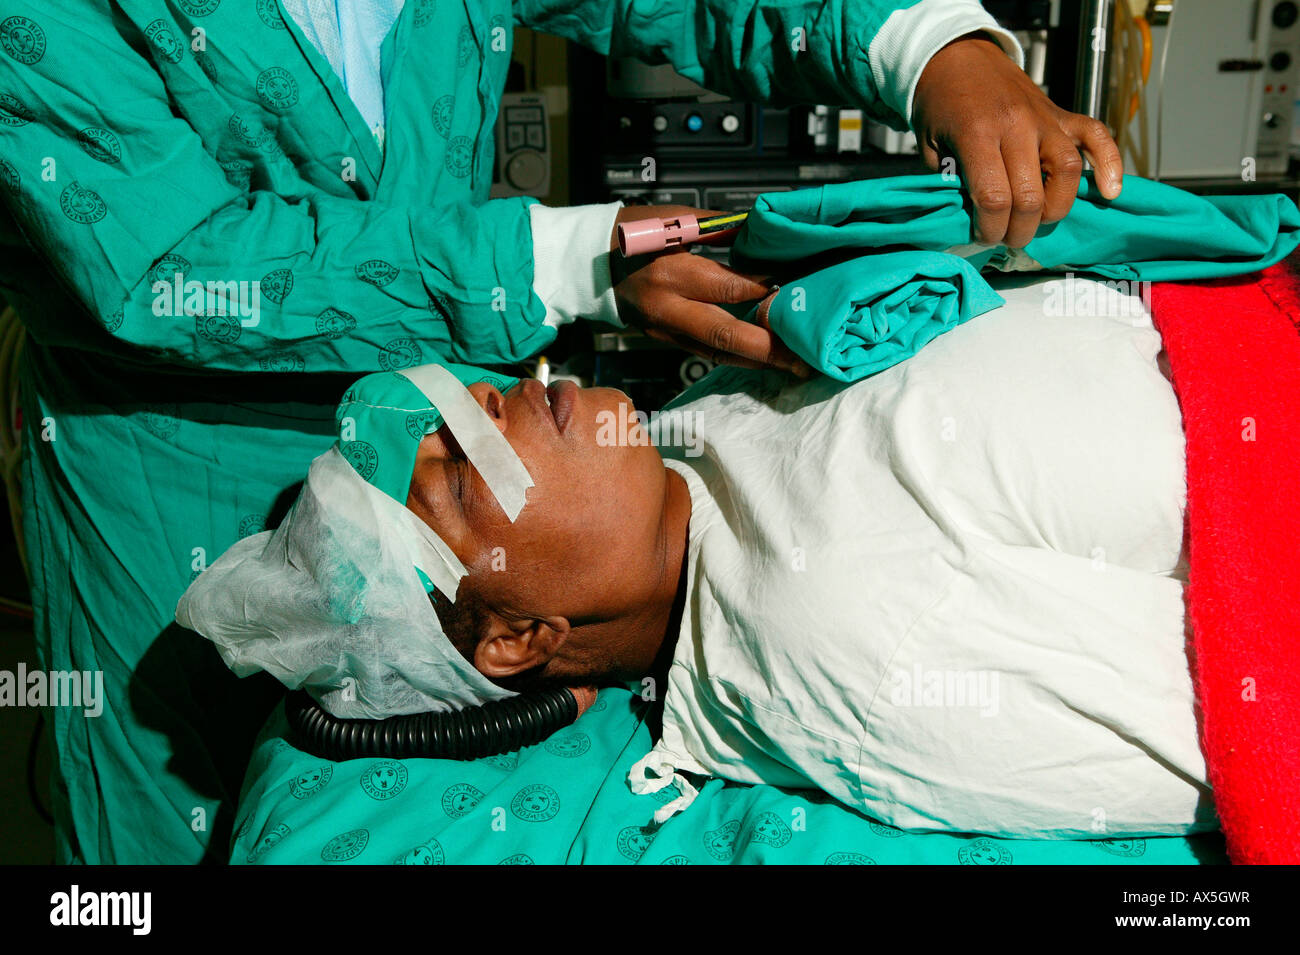 Physician and patient in the operating room after cataract surgery, Pietermaritzburg, South Africa, Africa Stock Photo